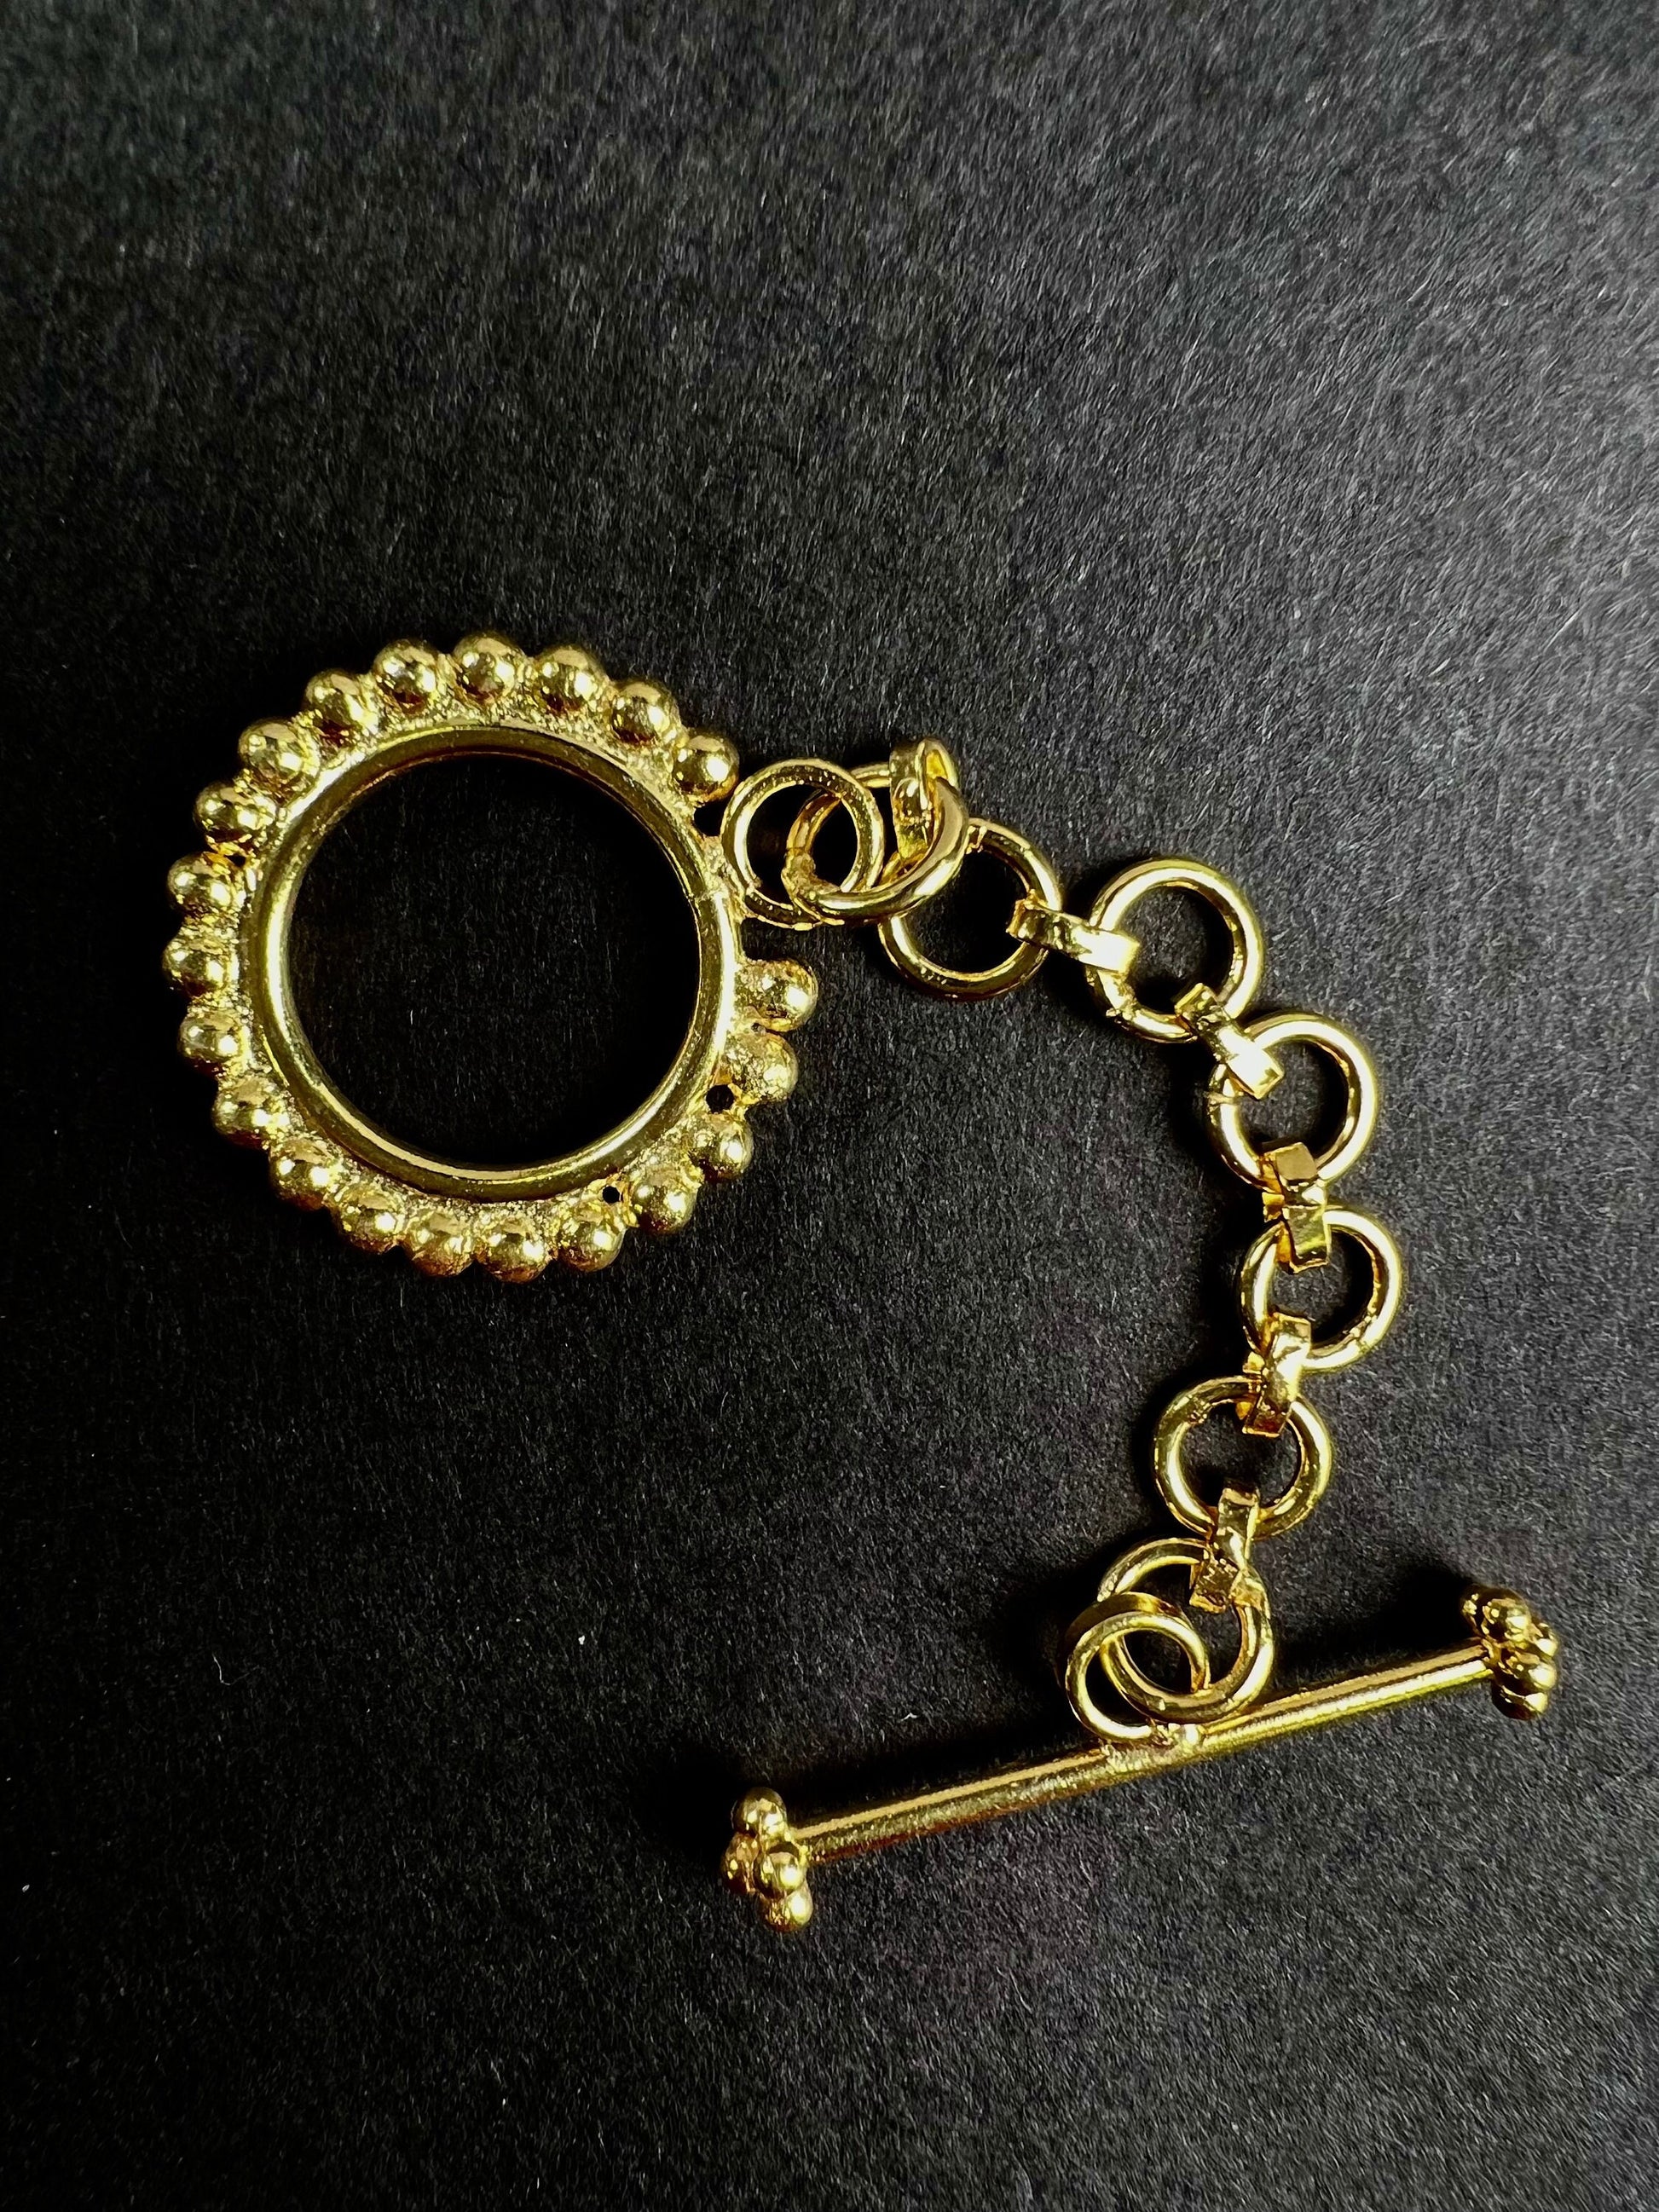 22K Gold Vermeil 925 Sterling Silver Bali fancy Toggle adjustable clasp , 21.5mm Circle, heavy weight, Vintage Handmade Clasp, 1 set or 2